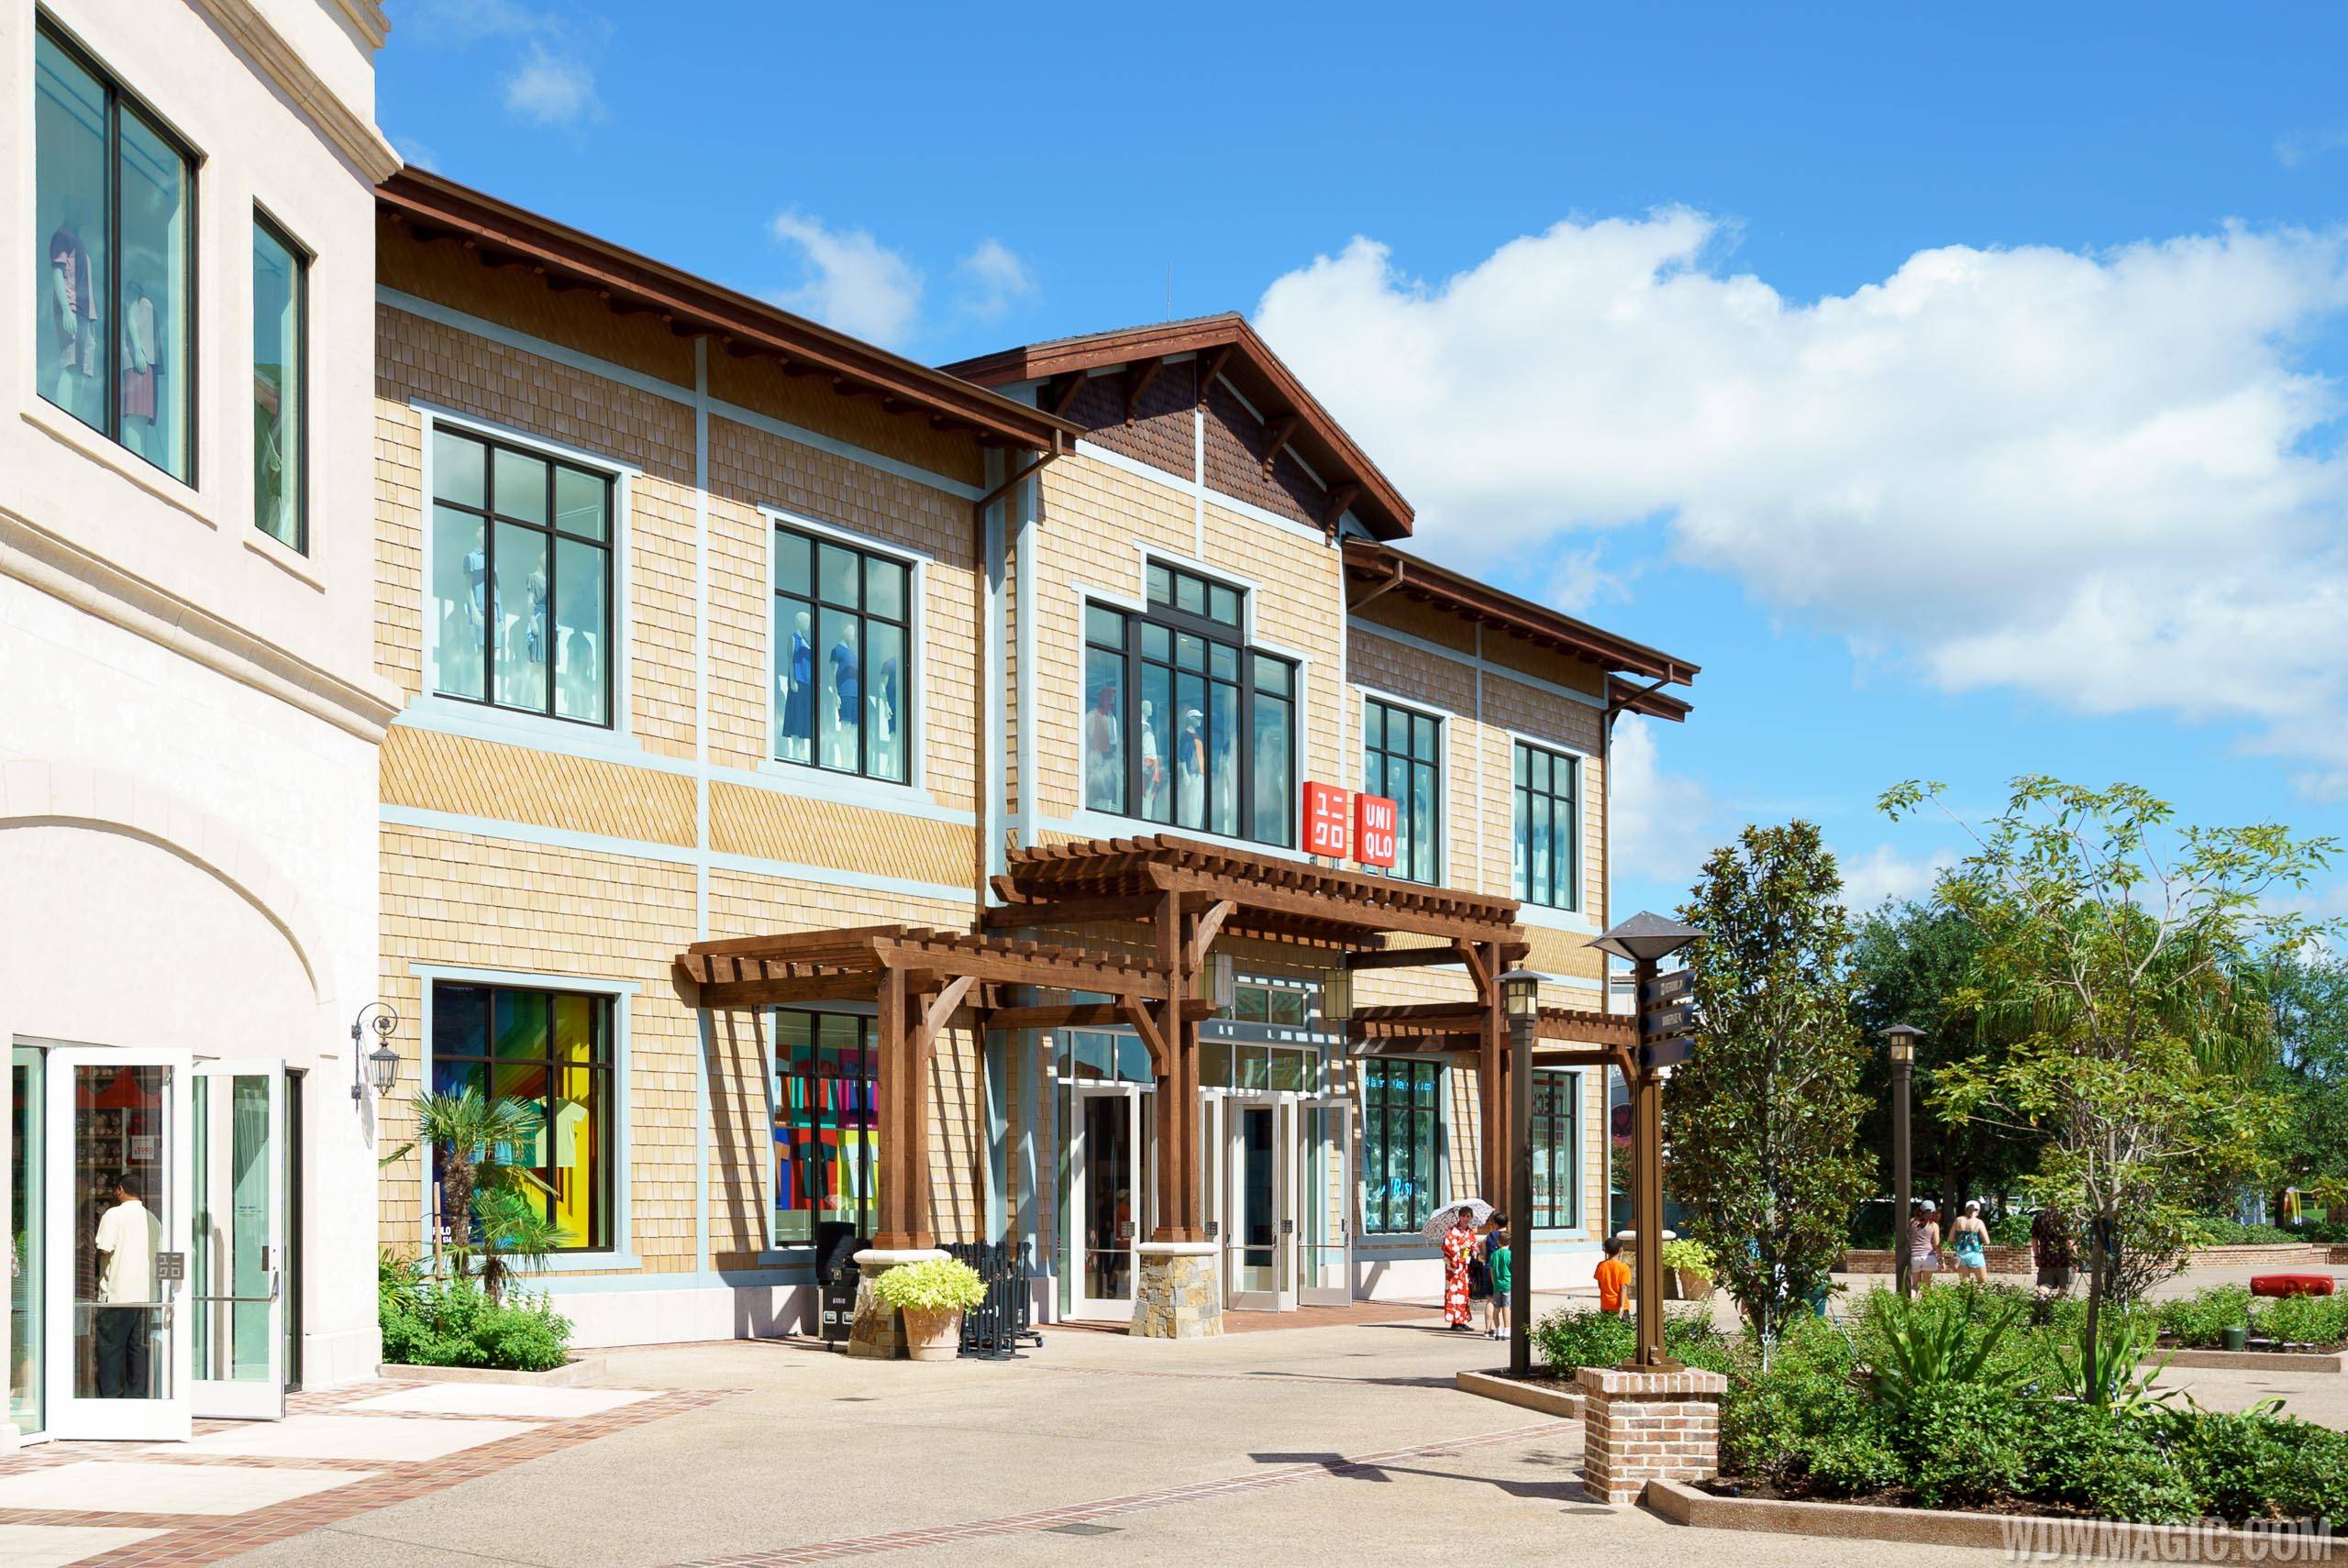 UNIQLO at Disney Springs overview